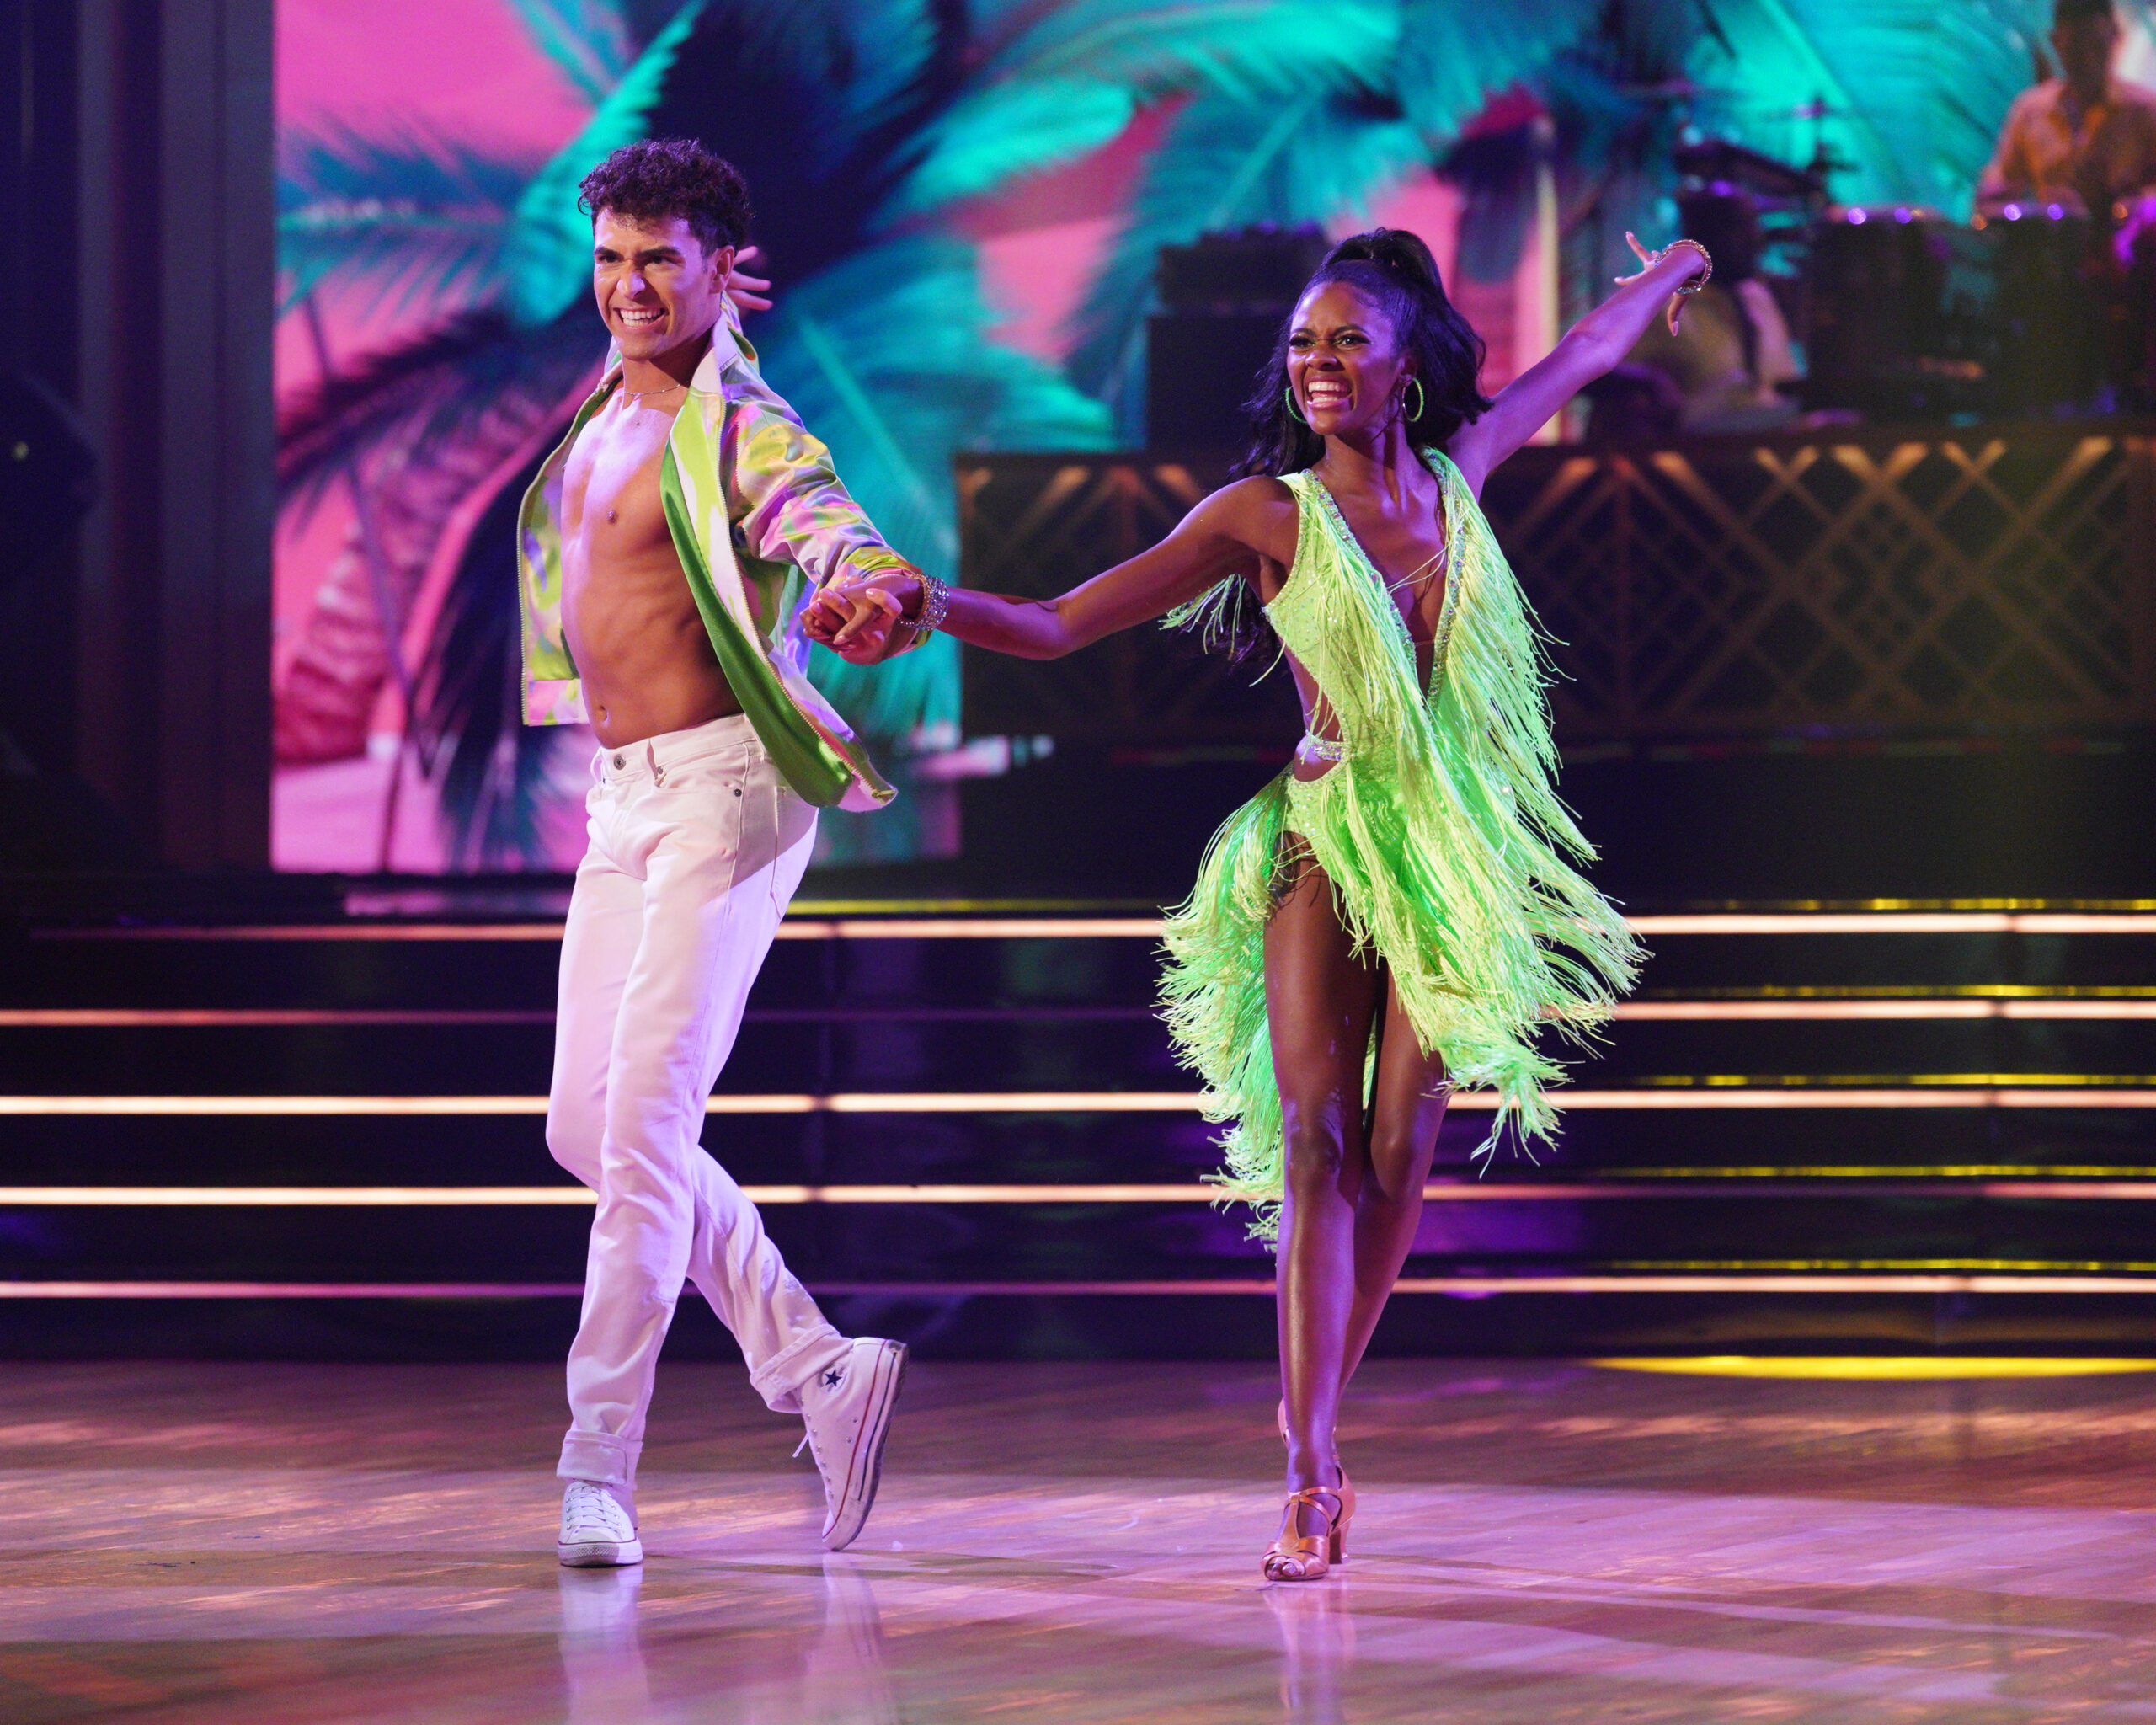 Charity Lawson performs alongside Erza Sosa for “Latin Night” in Dancing With the Stars Season 32, Episode 2.